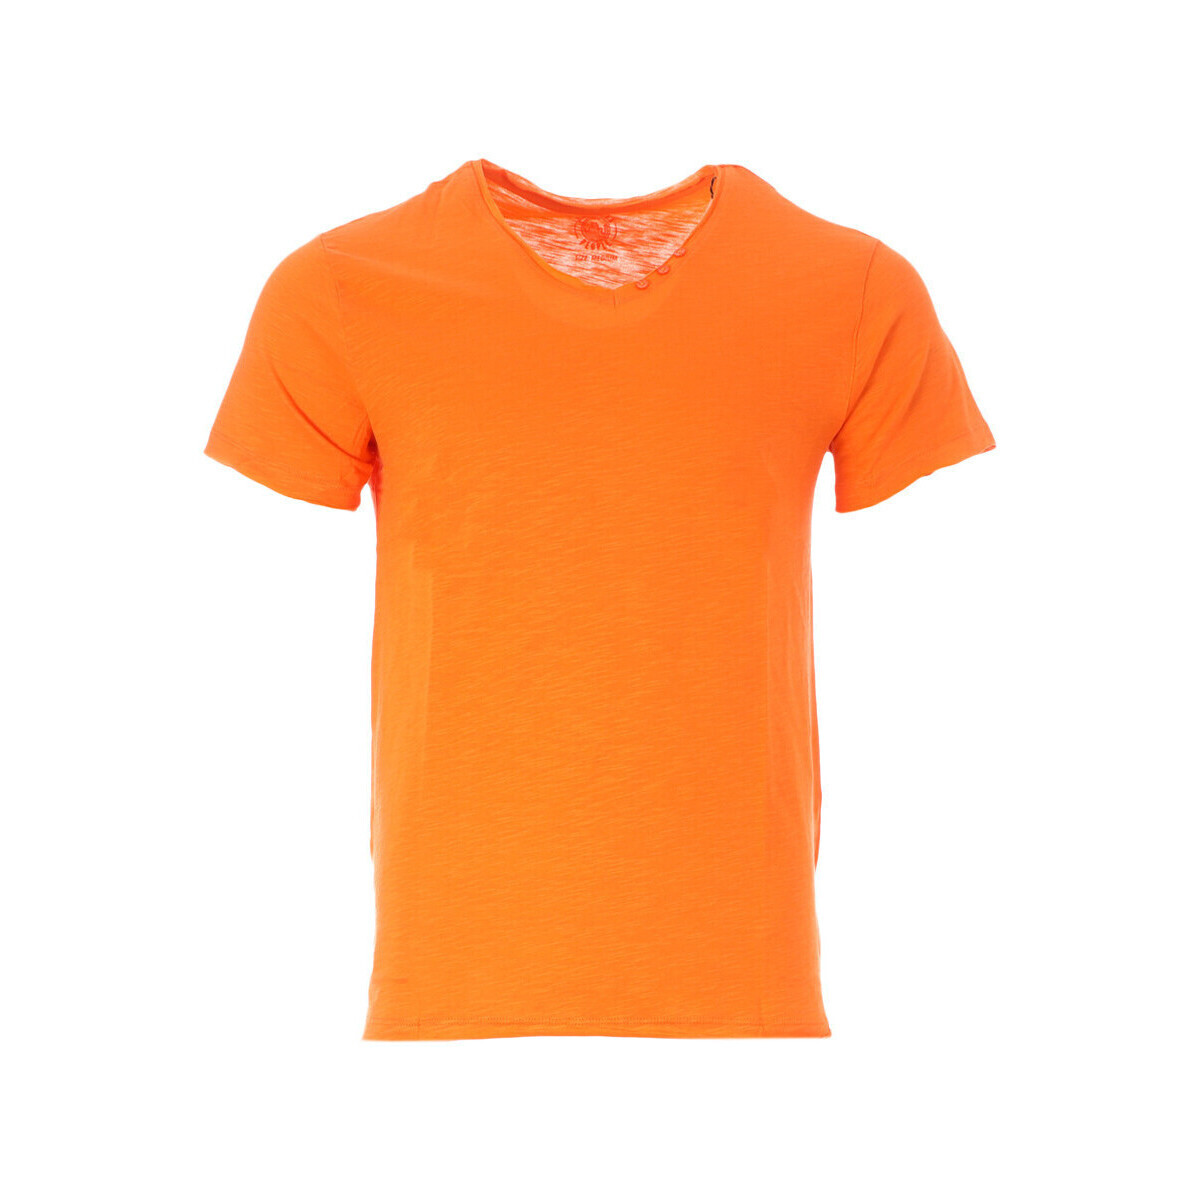 Textiel Heren T-shirts & Polo’s American People  Oranje